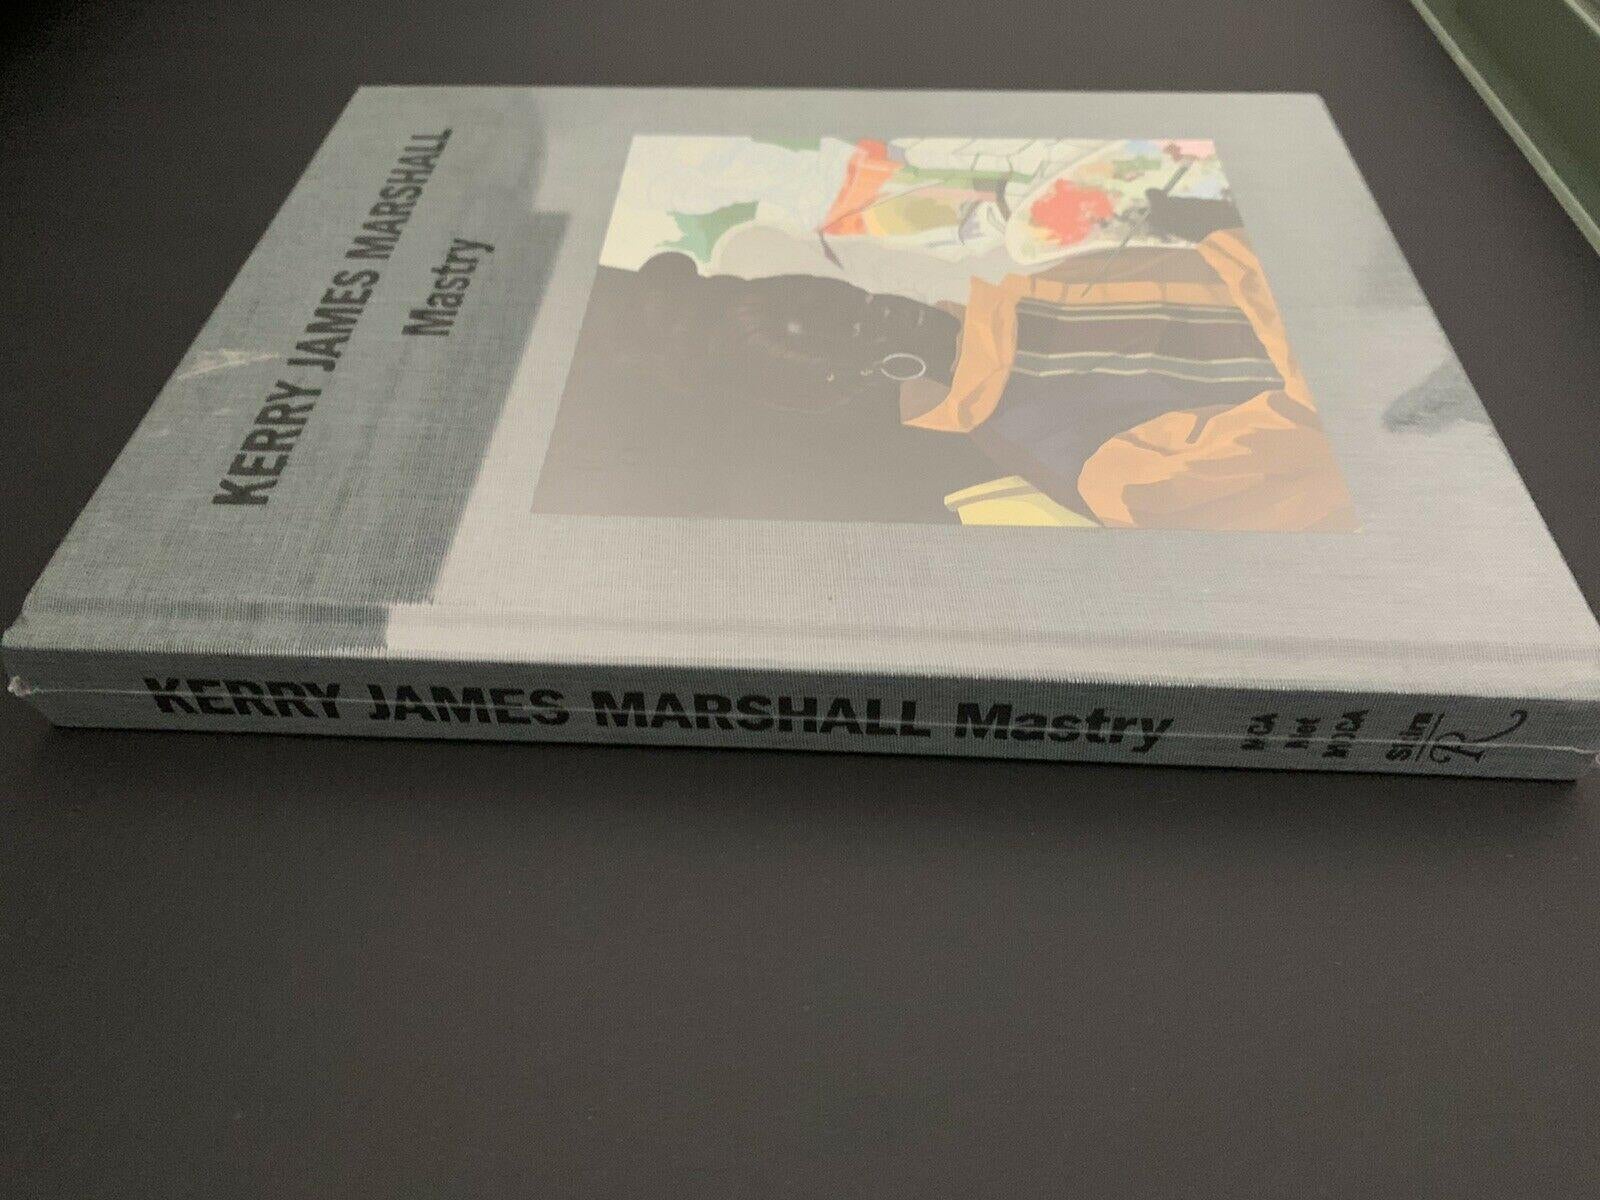 Mastry New and Sealed Exhibition Hardcover Catalogue For Sale 1